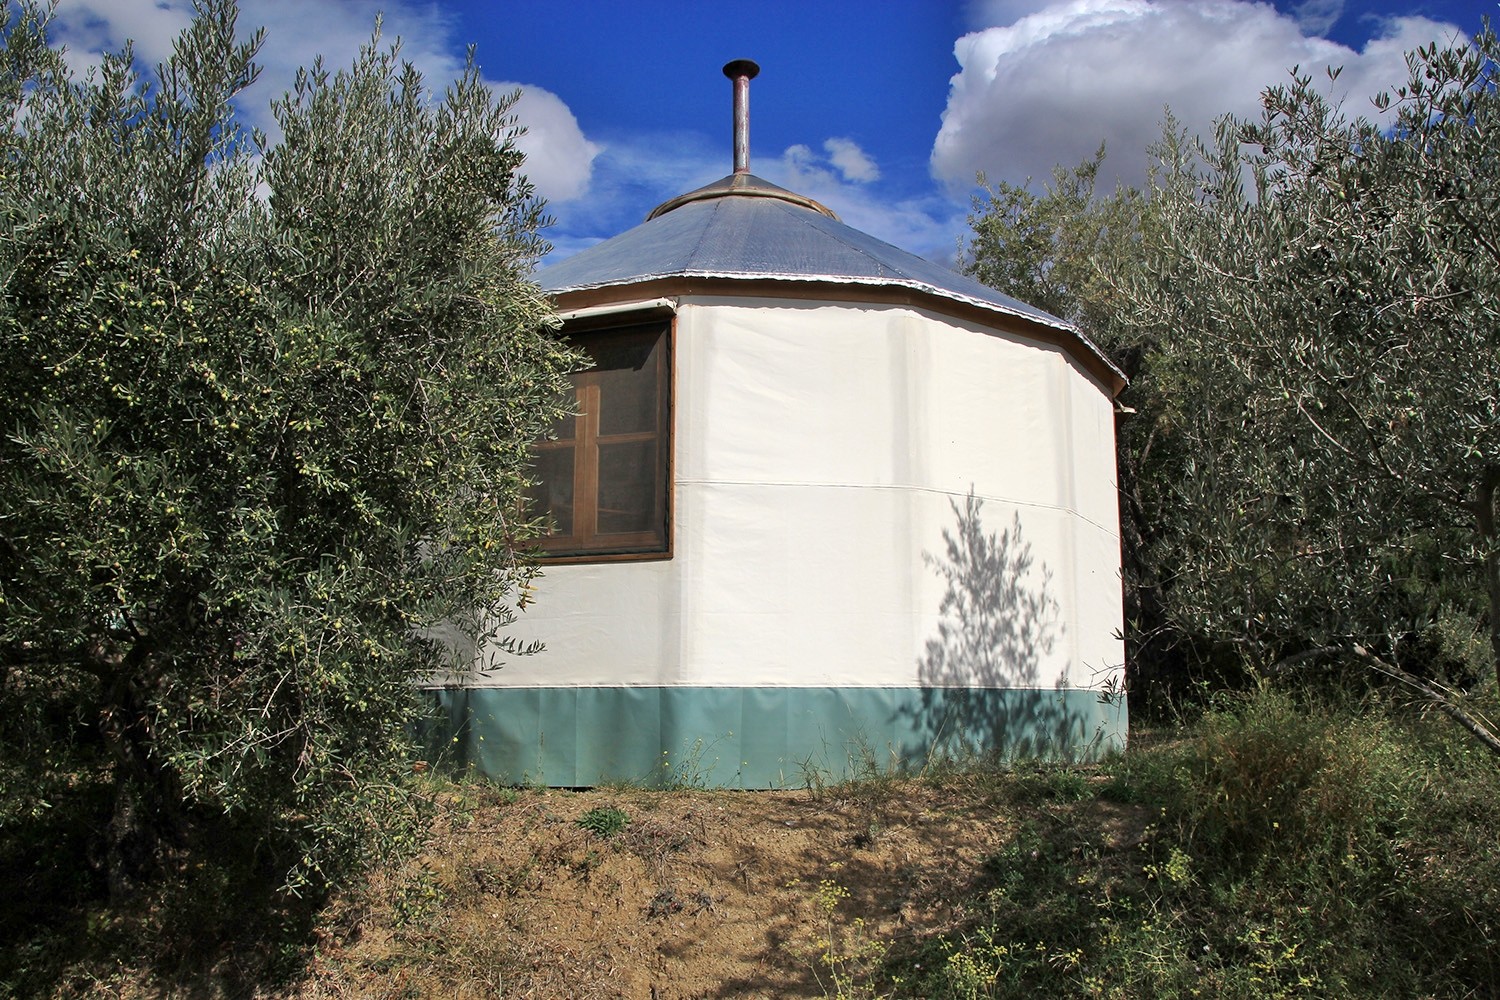 View on the small Yurt